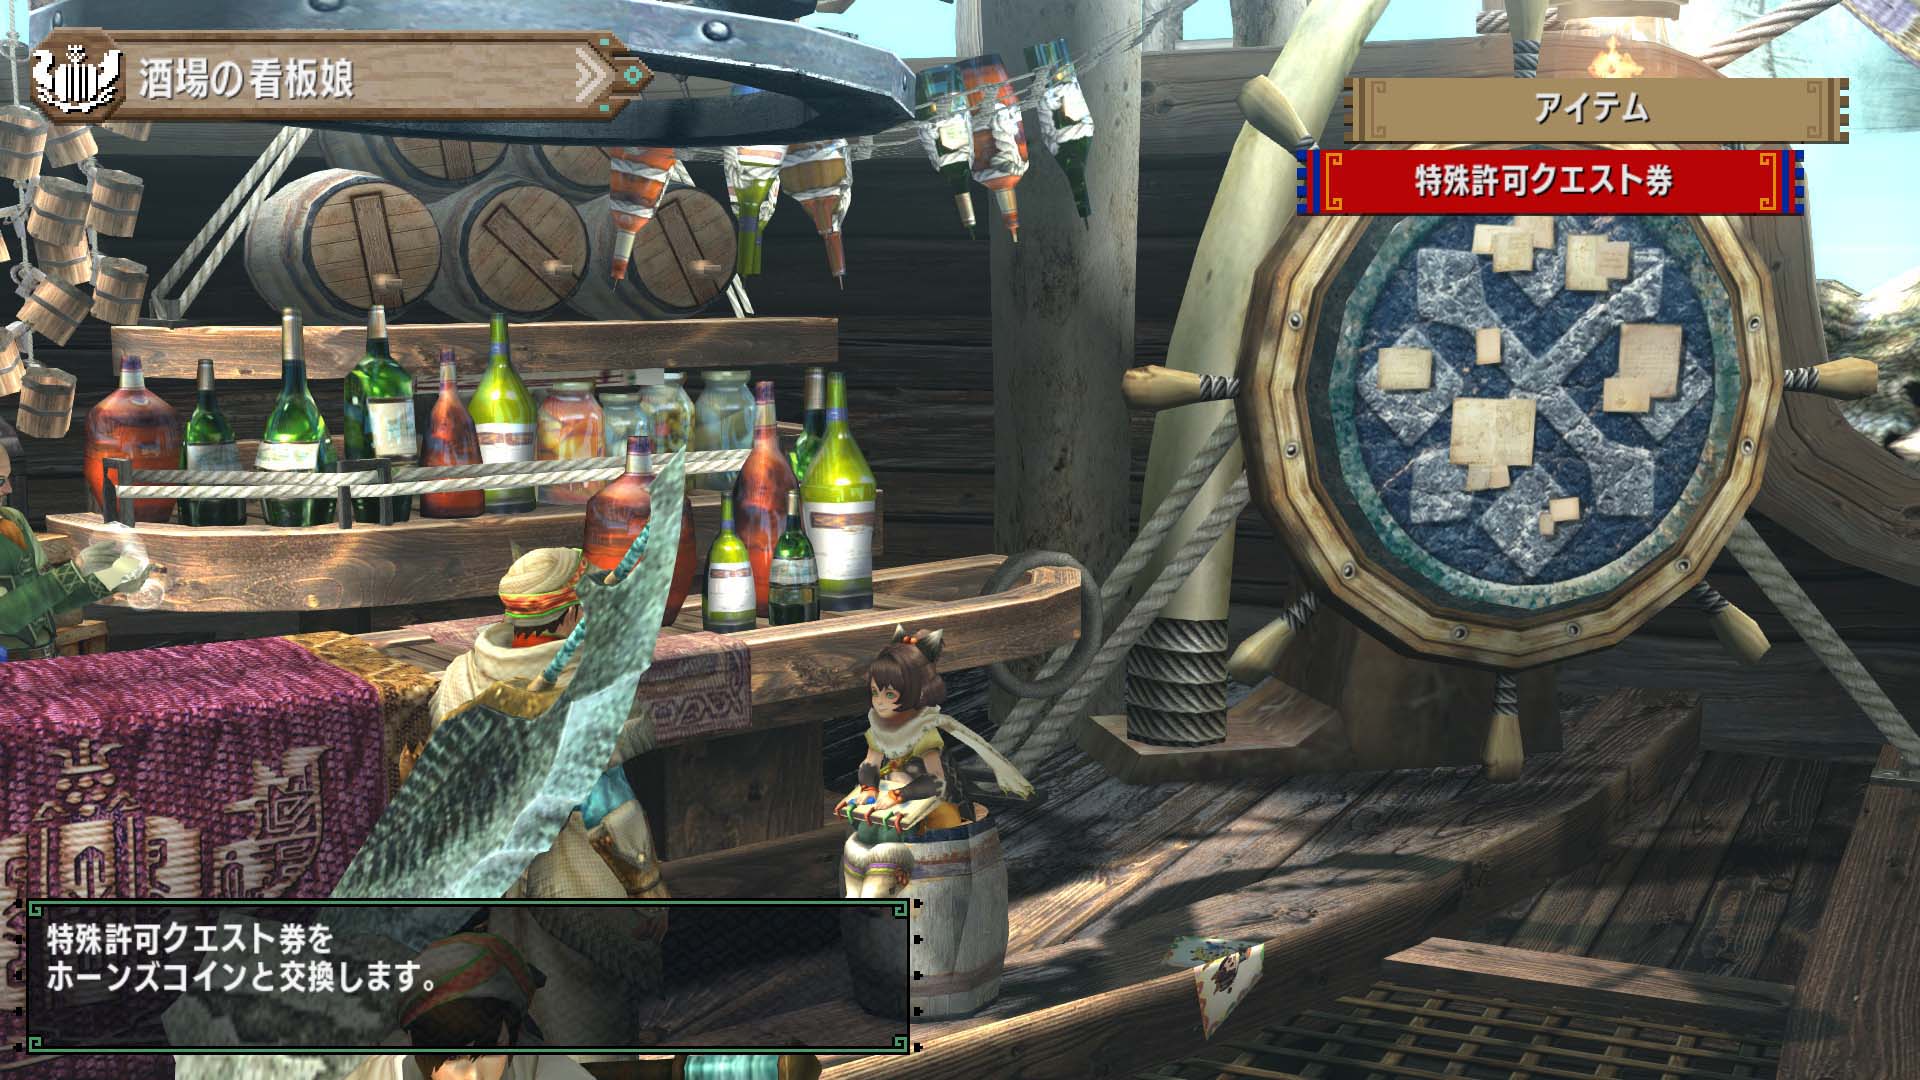 http://www.perfectly-nintendo.com/wp-content/gallery/monster-hunter-xx-switch-04-08-2017/012.jpg